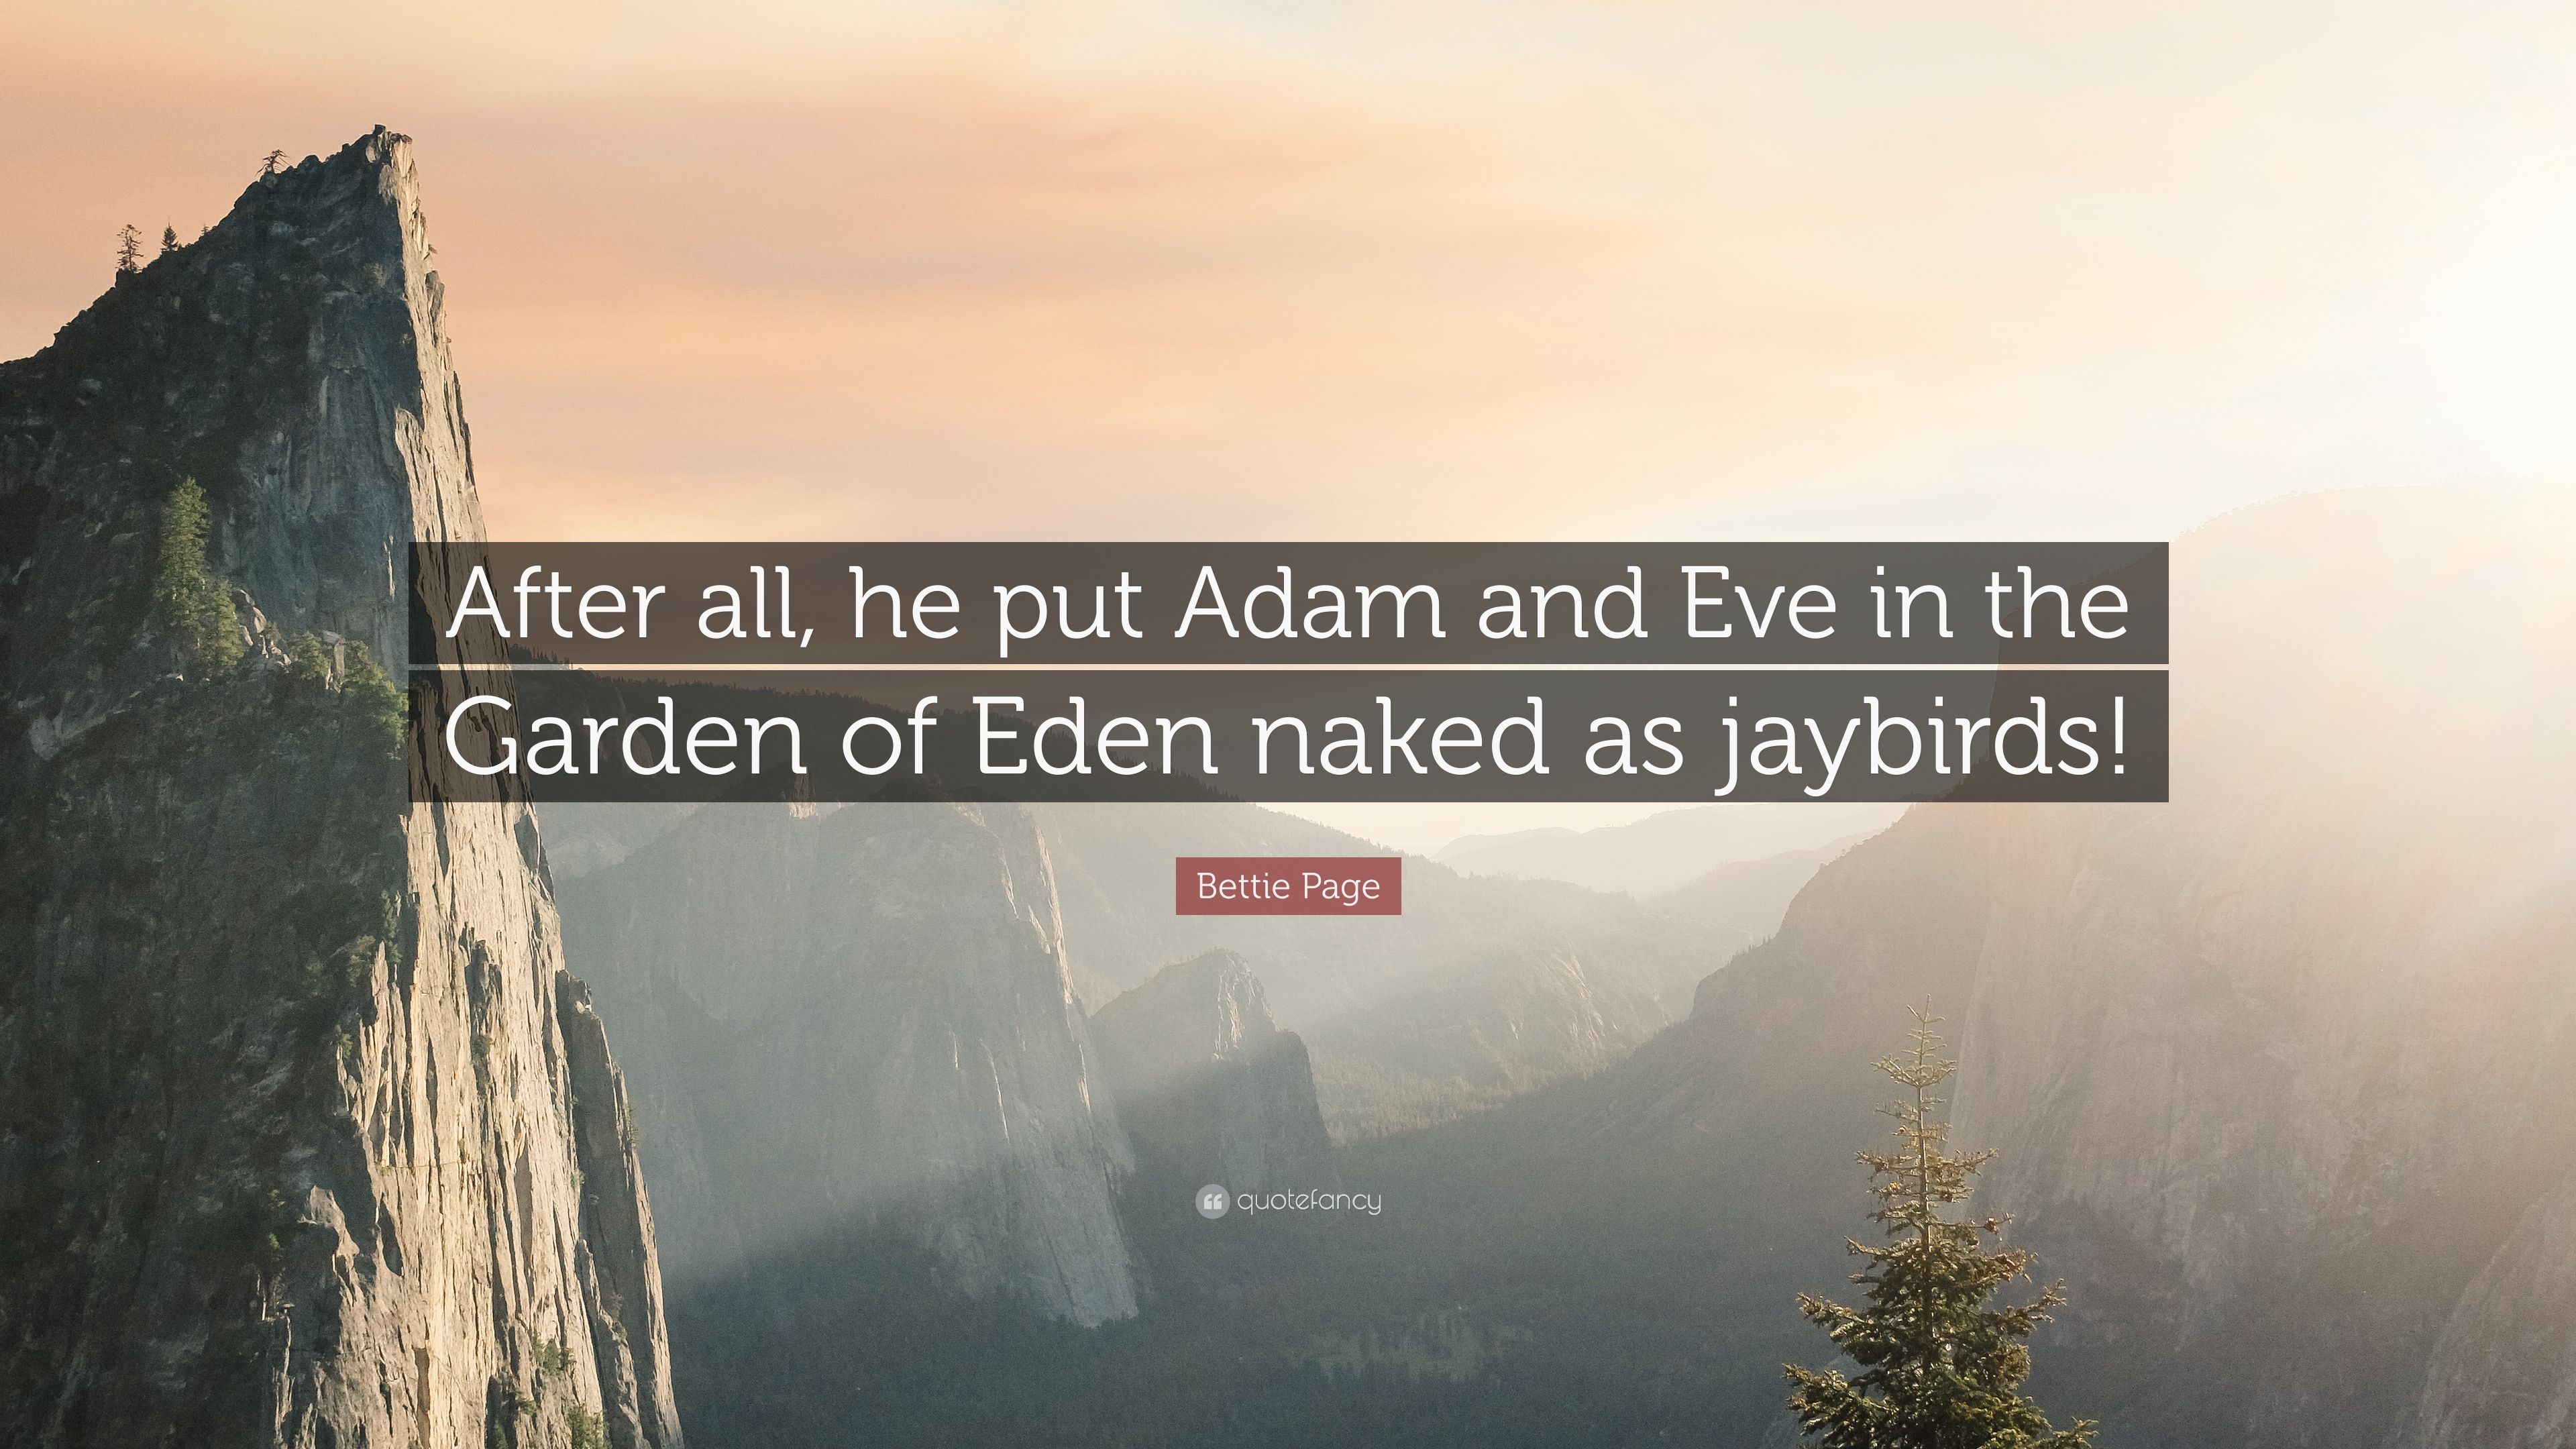 Bettie Page Quote: “After all, he put Adam and Eve in the Garden